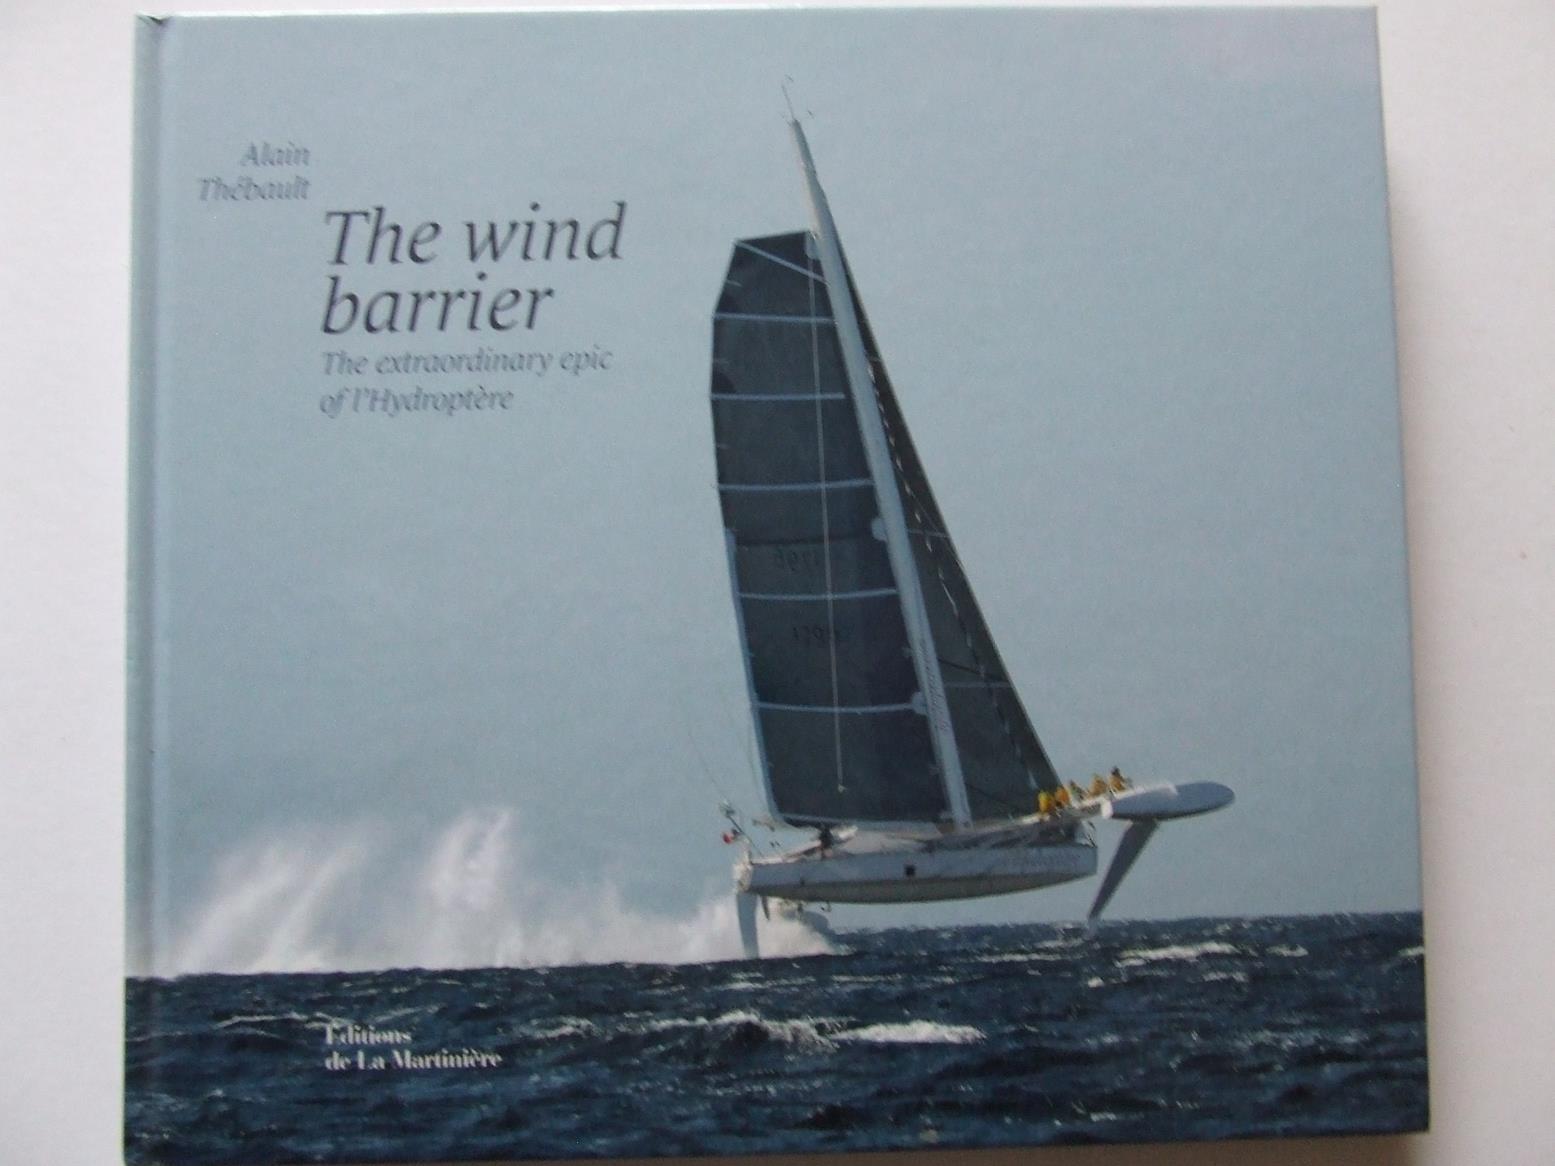 The Wind Barrier, the extraordinary epic of l'Hydroptere